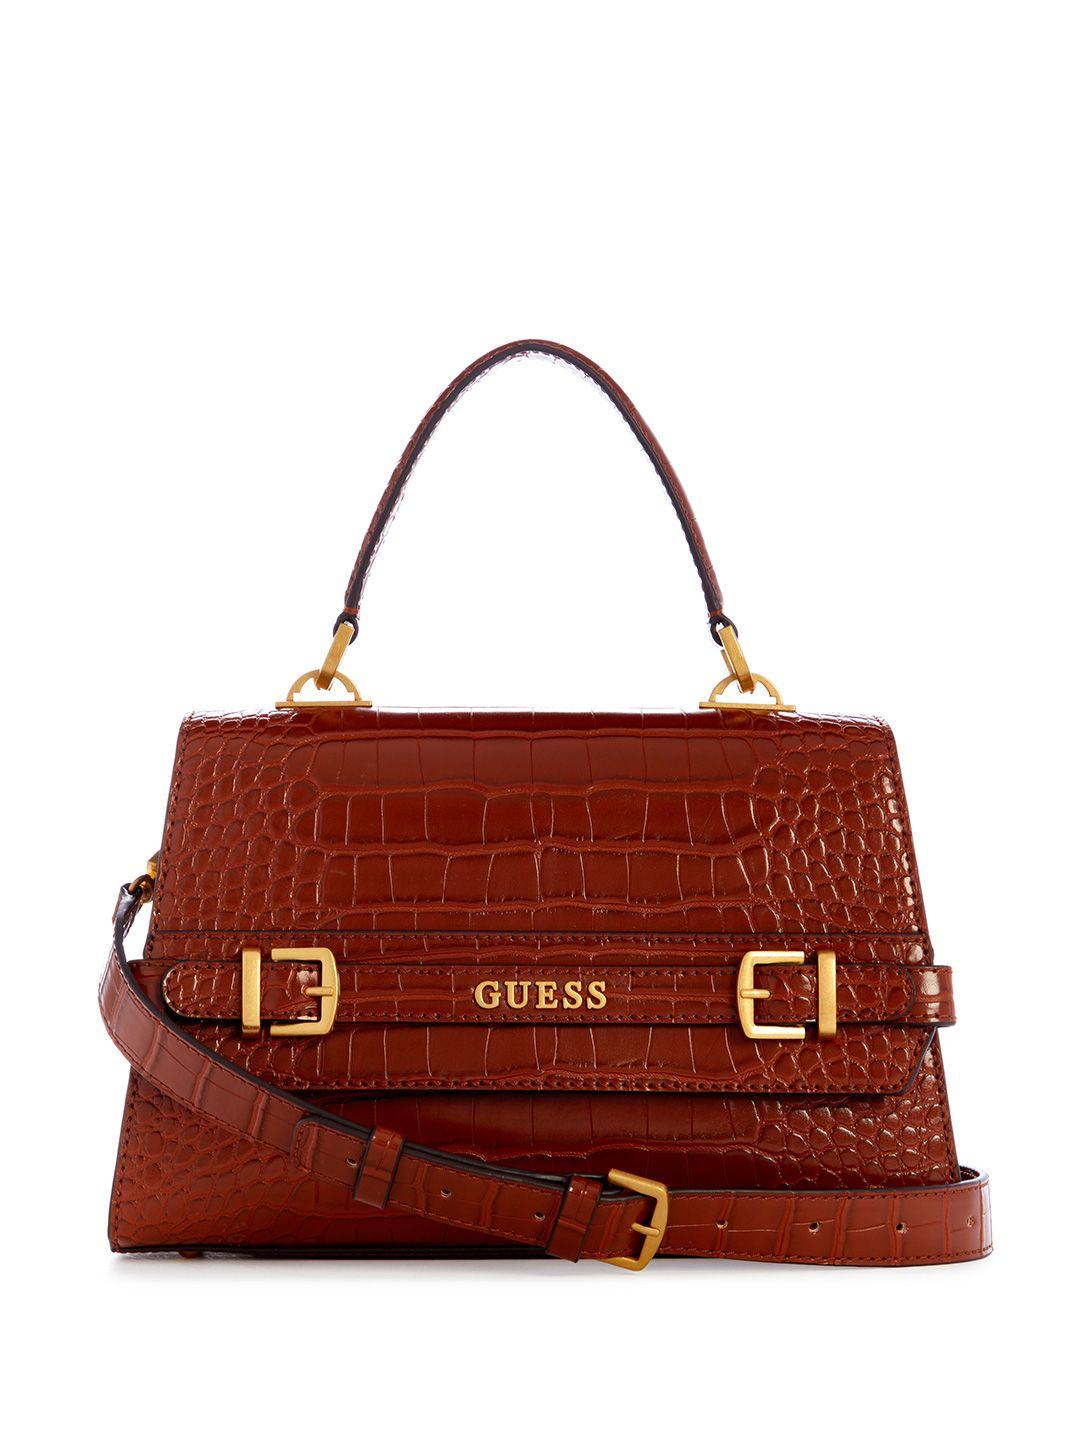 guess croc textured structured satchel bag with buckle detail